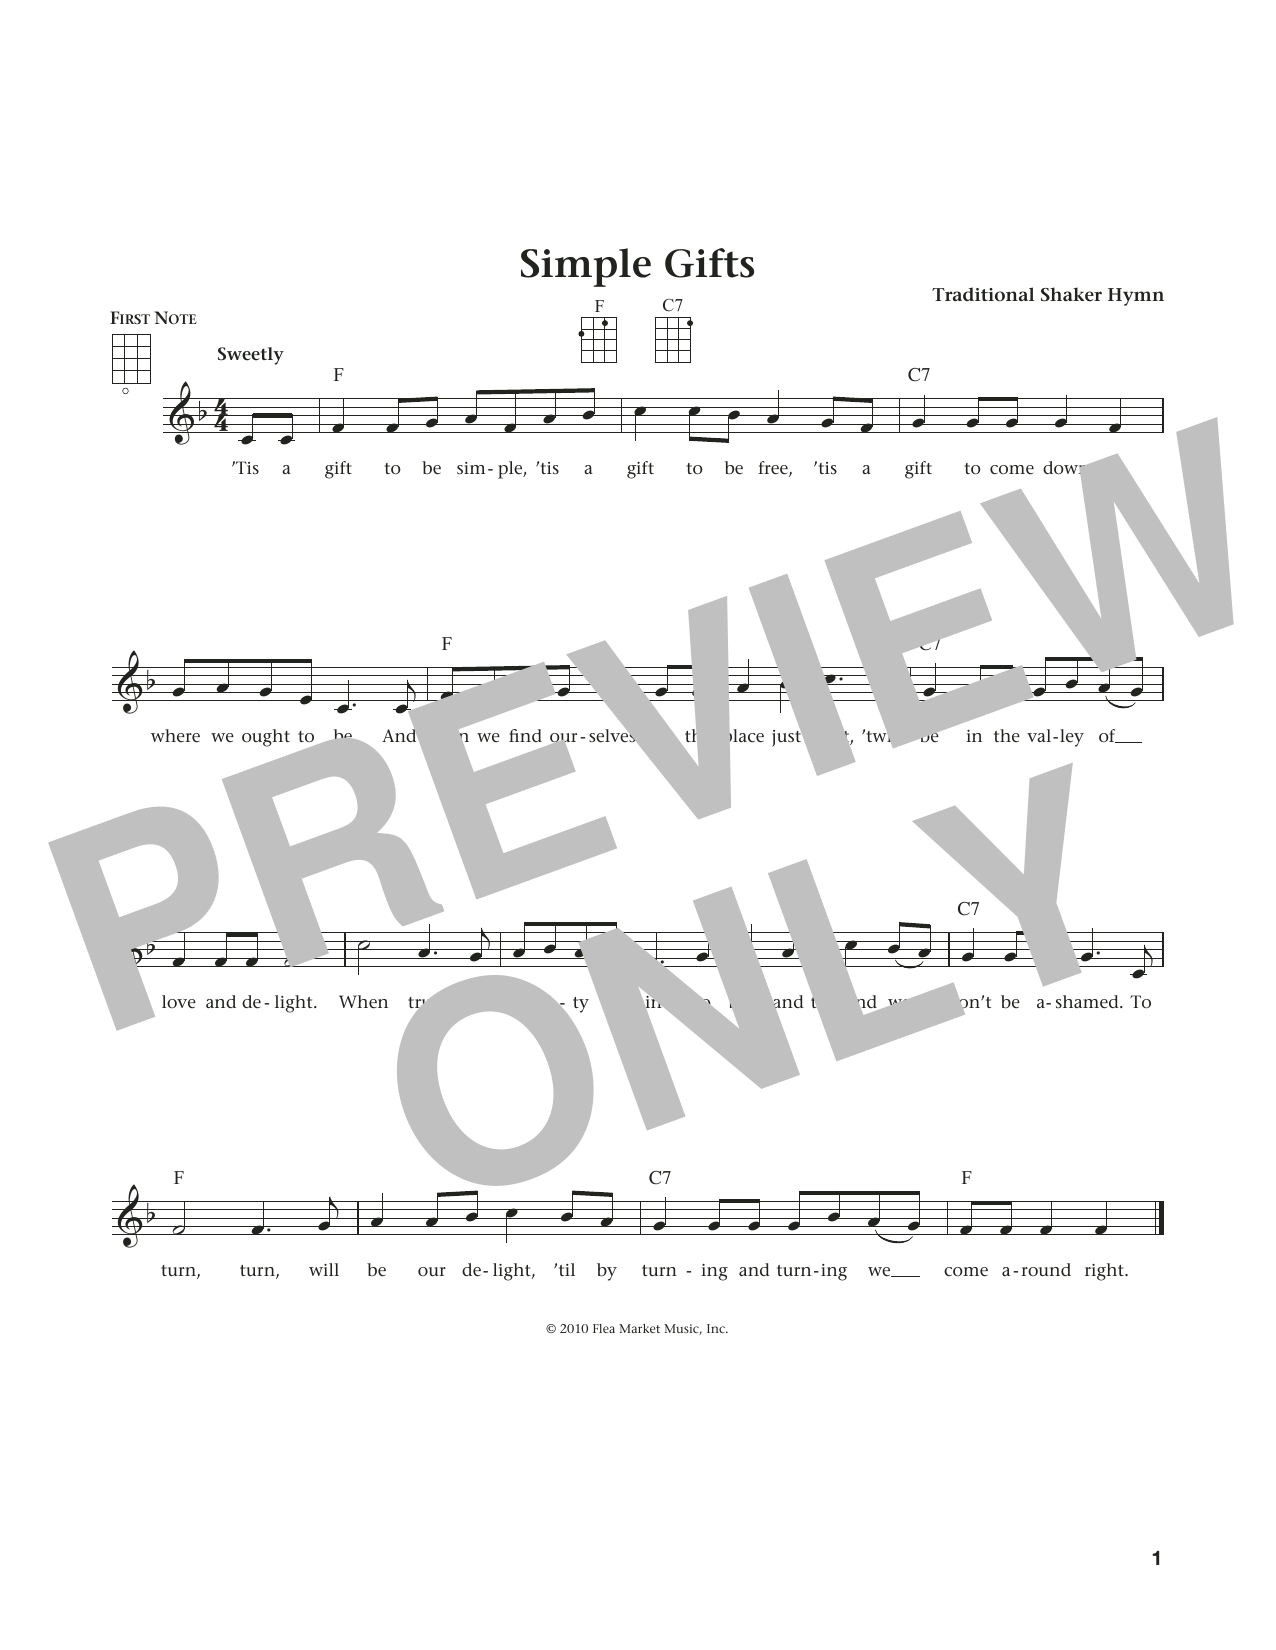 Download Traditional Shaker Hymn Simple Gifts (from The Daily Ukulele) ( Sheet Music